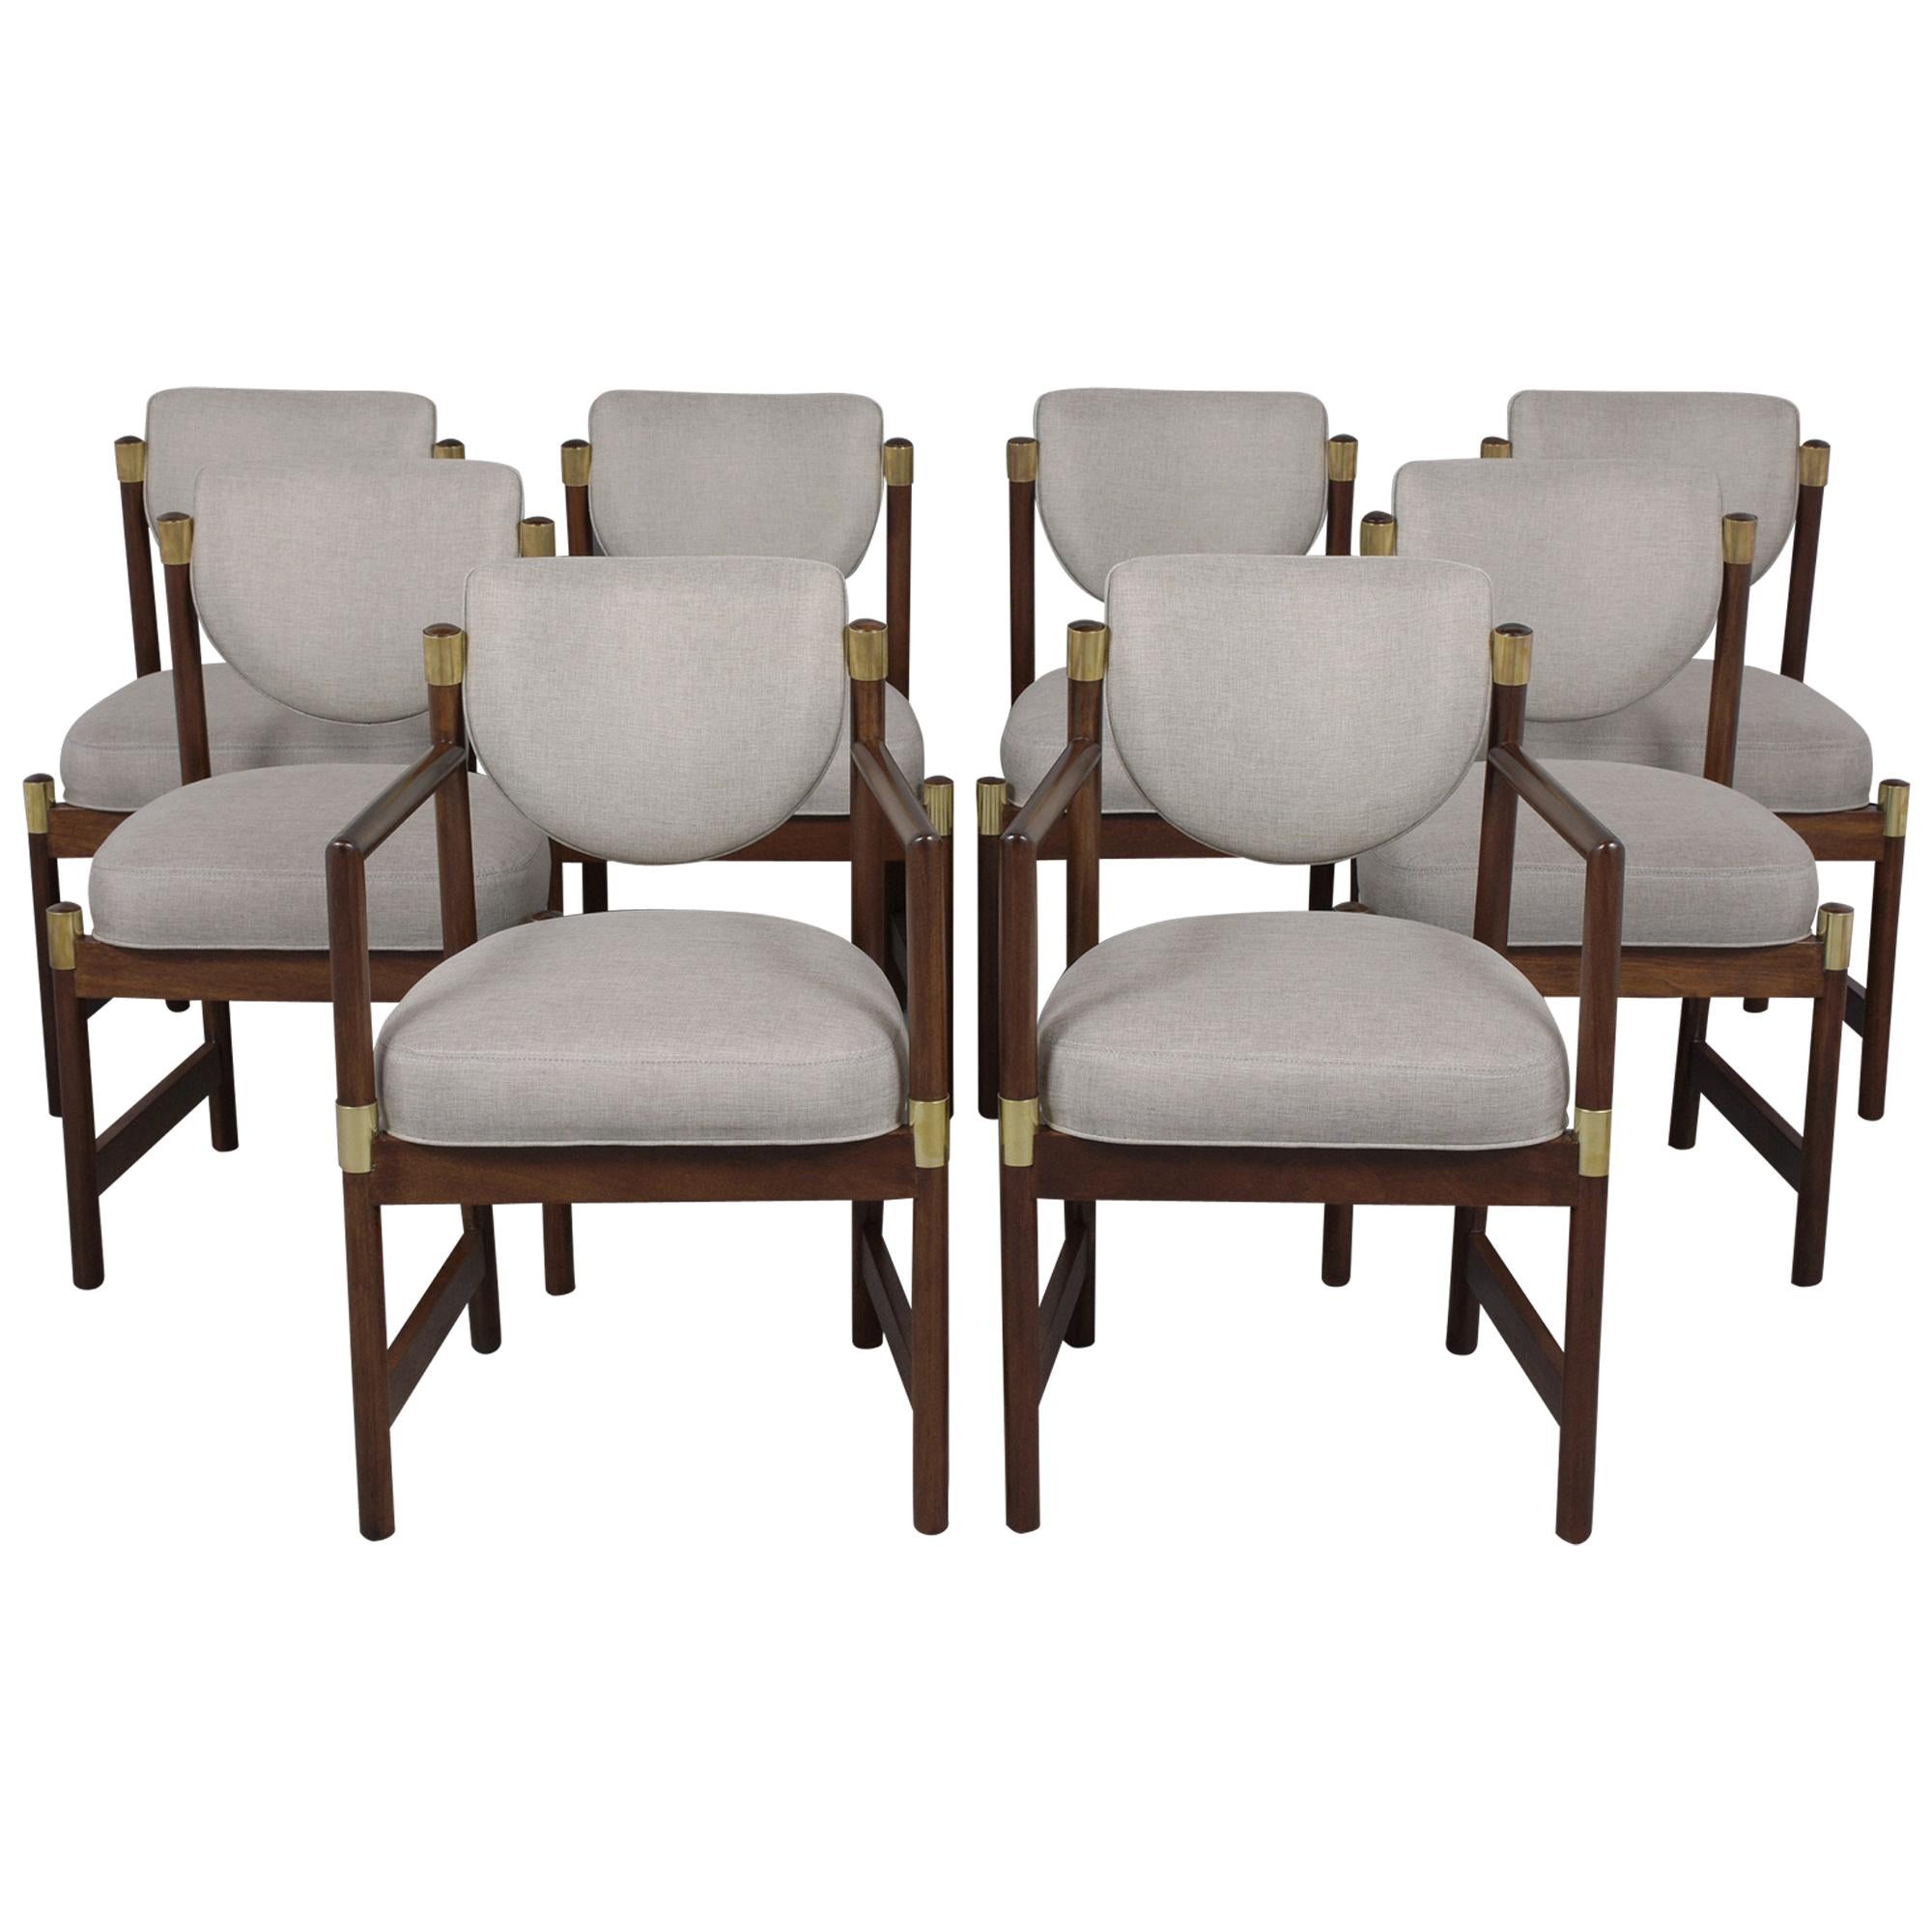 A set of eight Mid-Century Modern dining chairs in a manner of T.H. Robsjohn Gibbings in excellent condition that has been hand-crafted out of walnut and restored by our team of craftsmen This set comes with two armchairs and six side chairs that